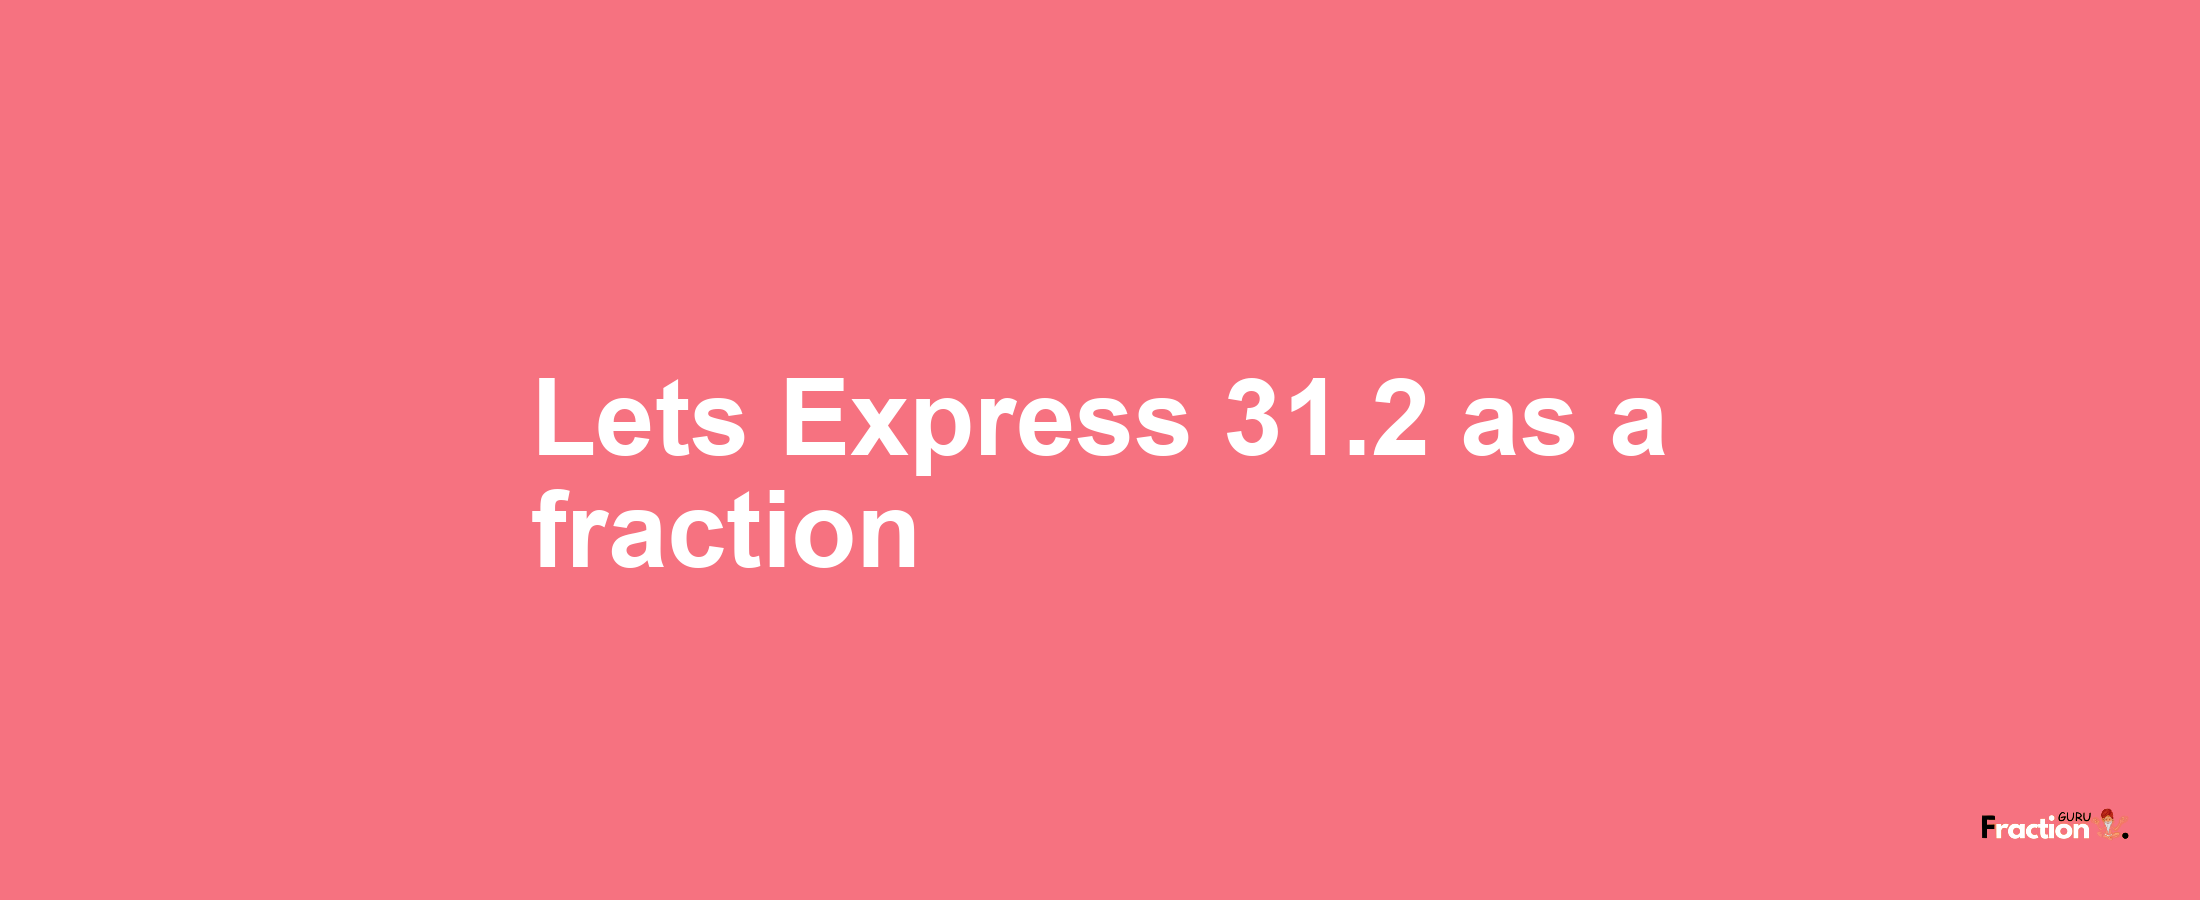 Lets Express 31.2 as afraction